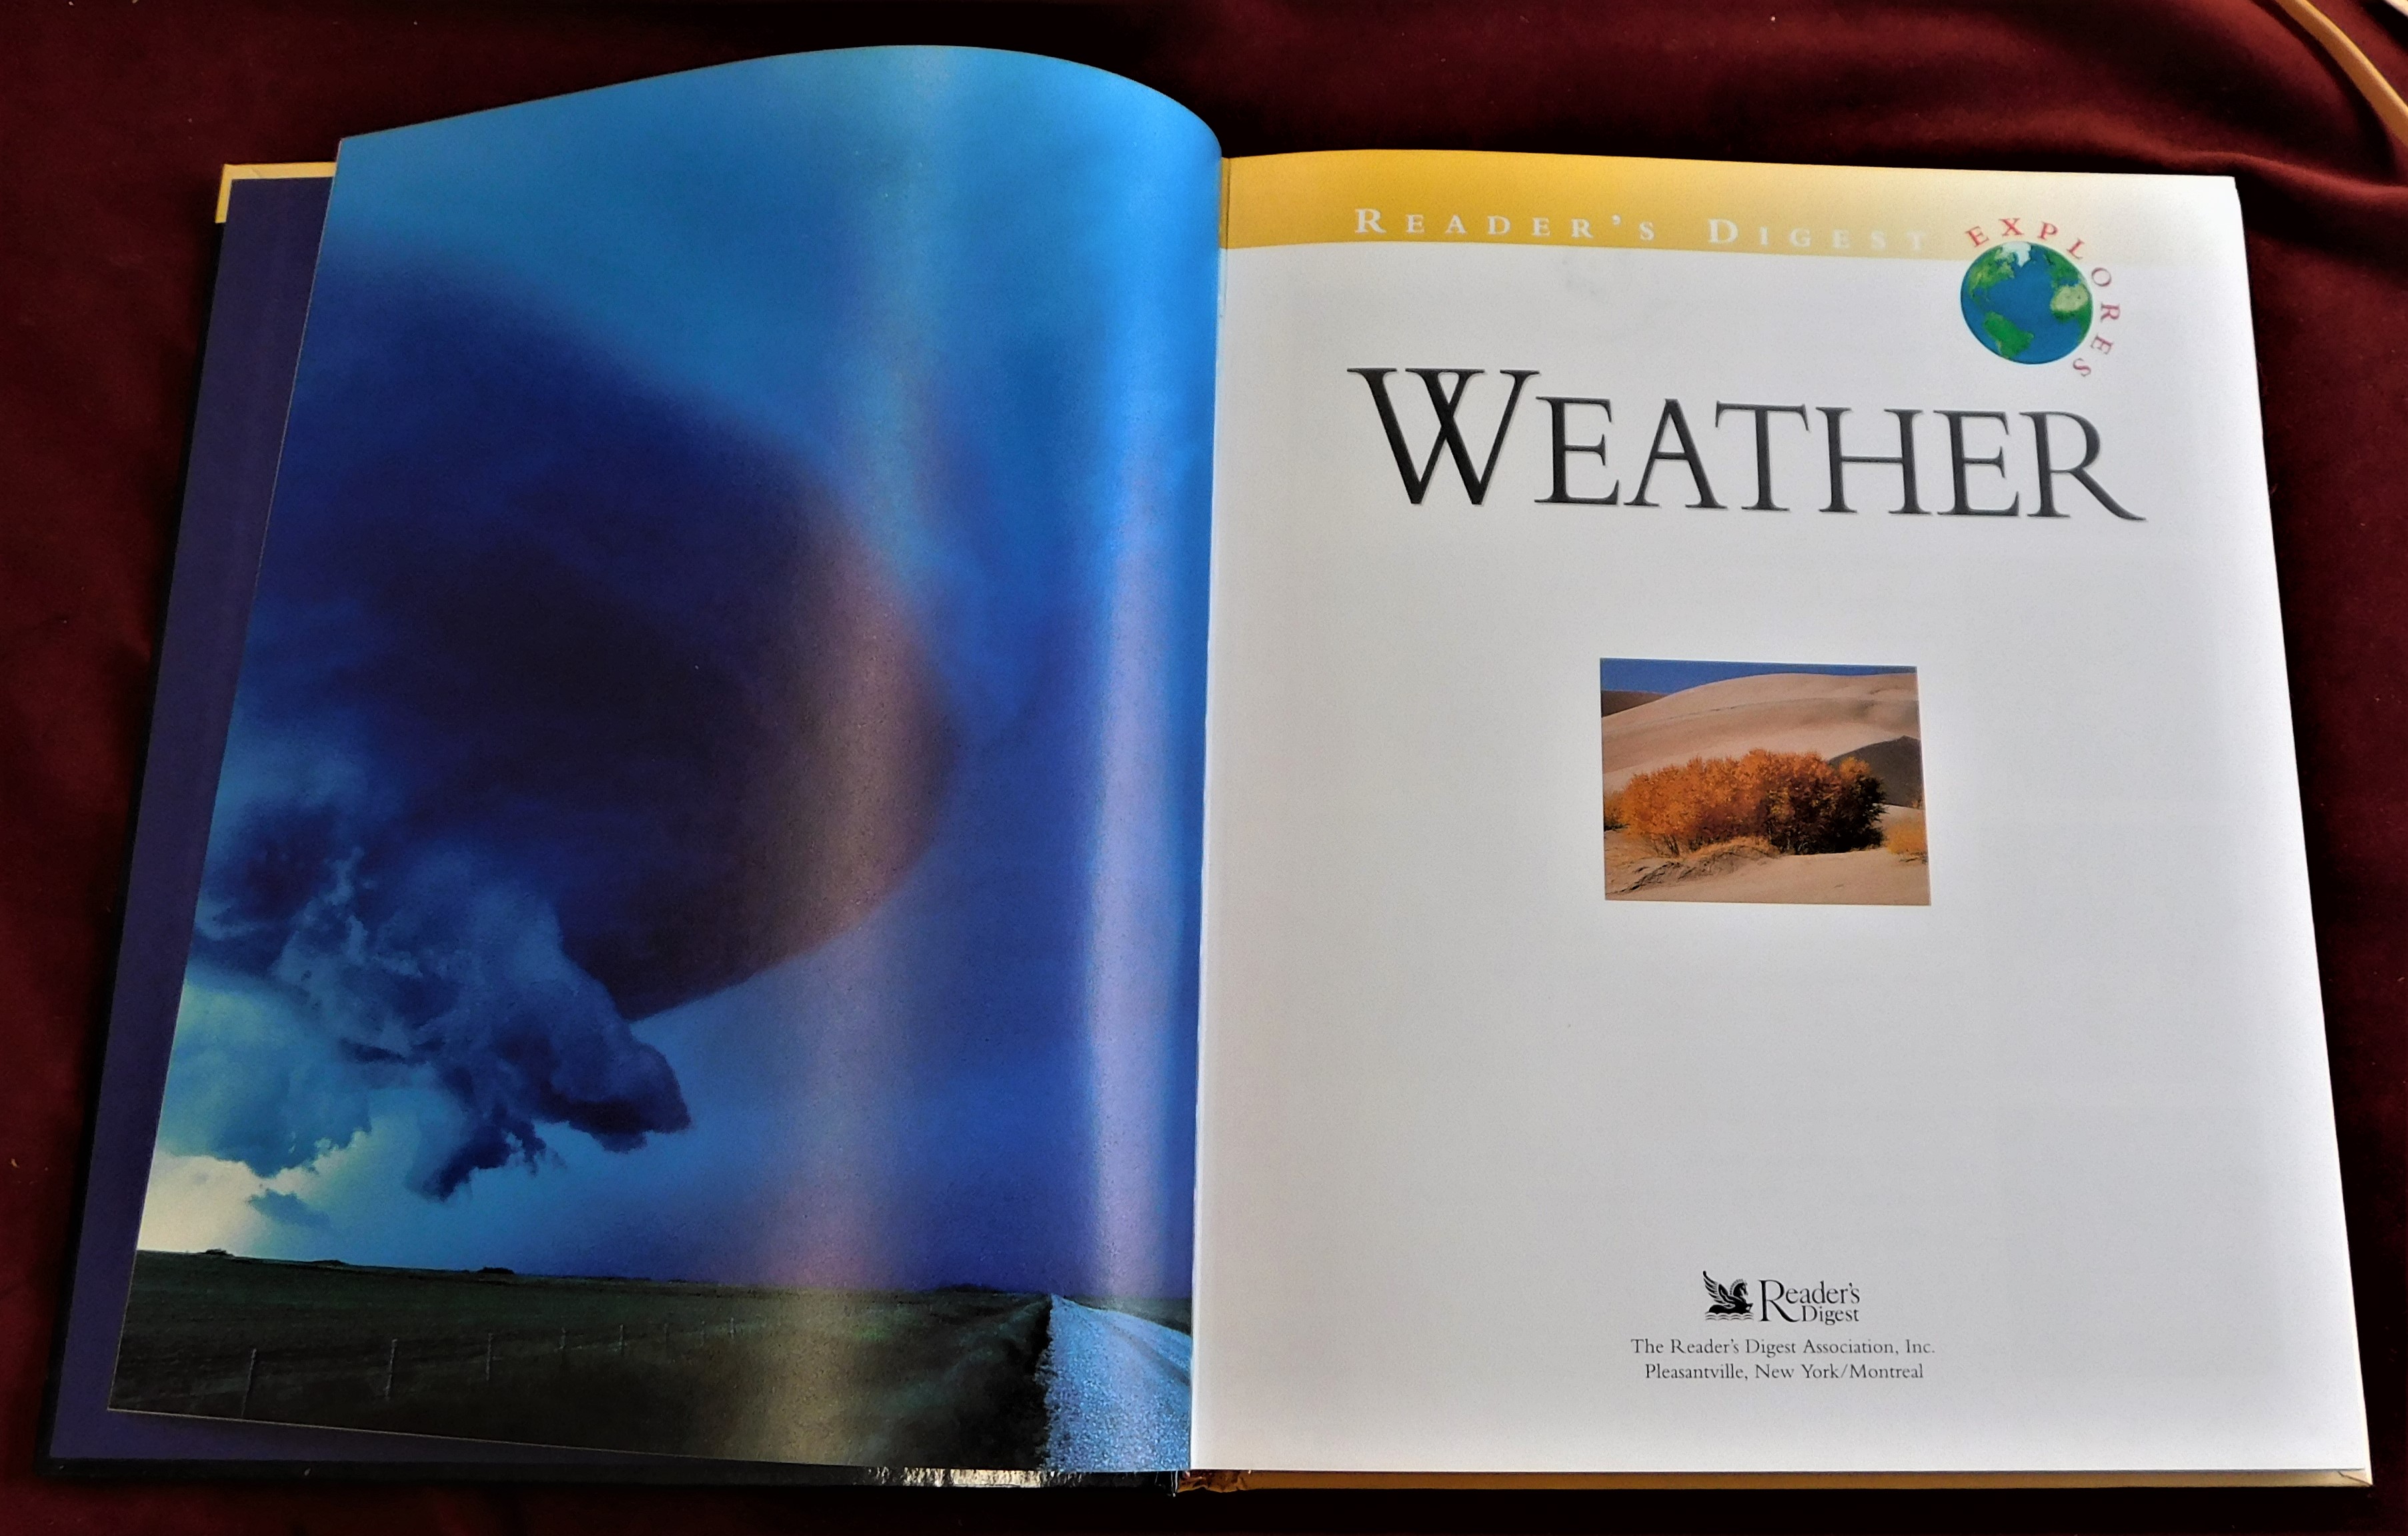 Weather- Readers Digest (1997) colour prints - excellent condition - Image 4 of 4